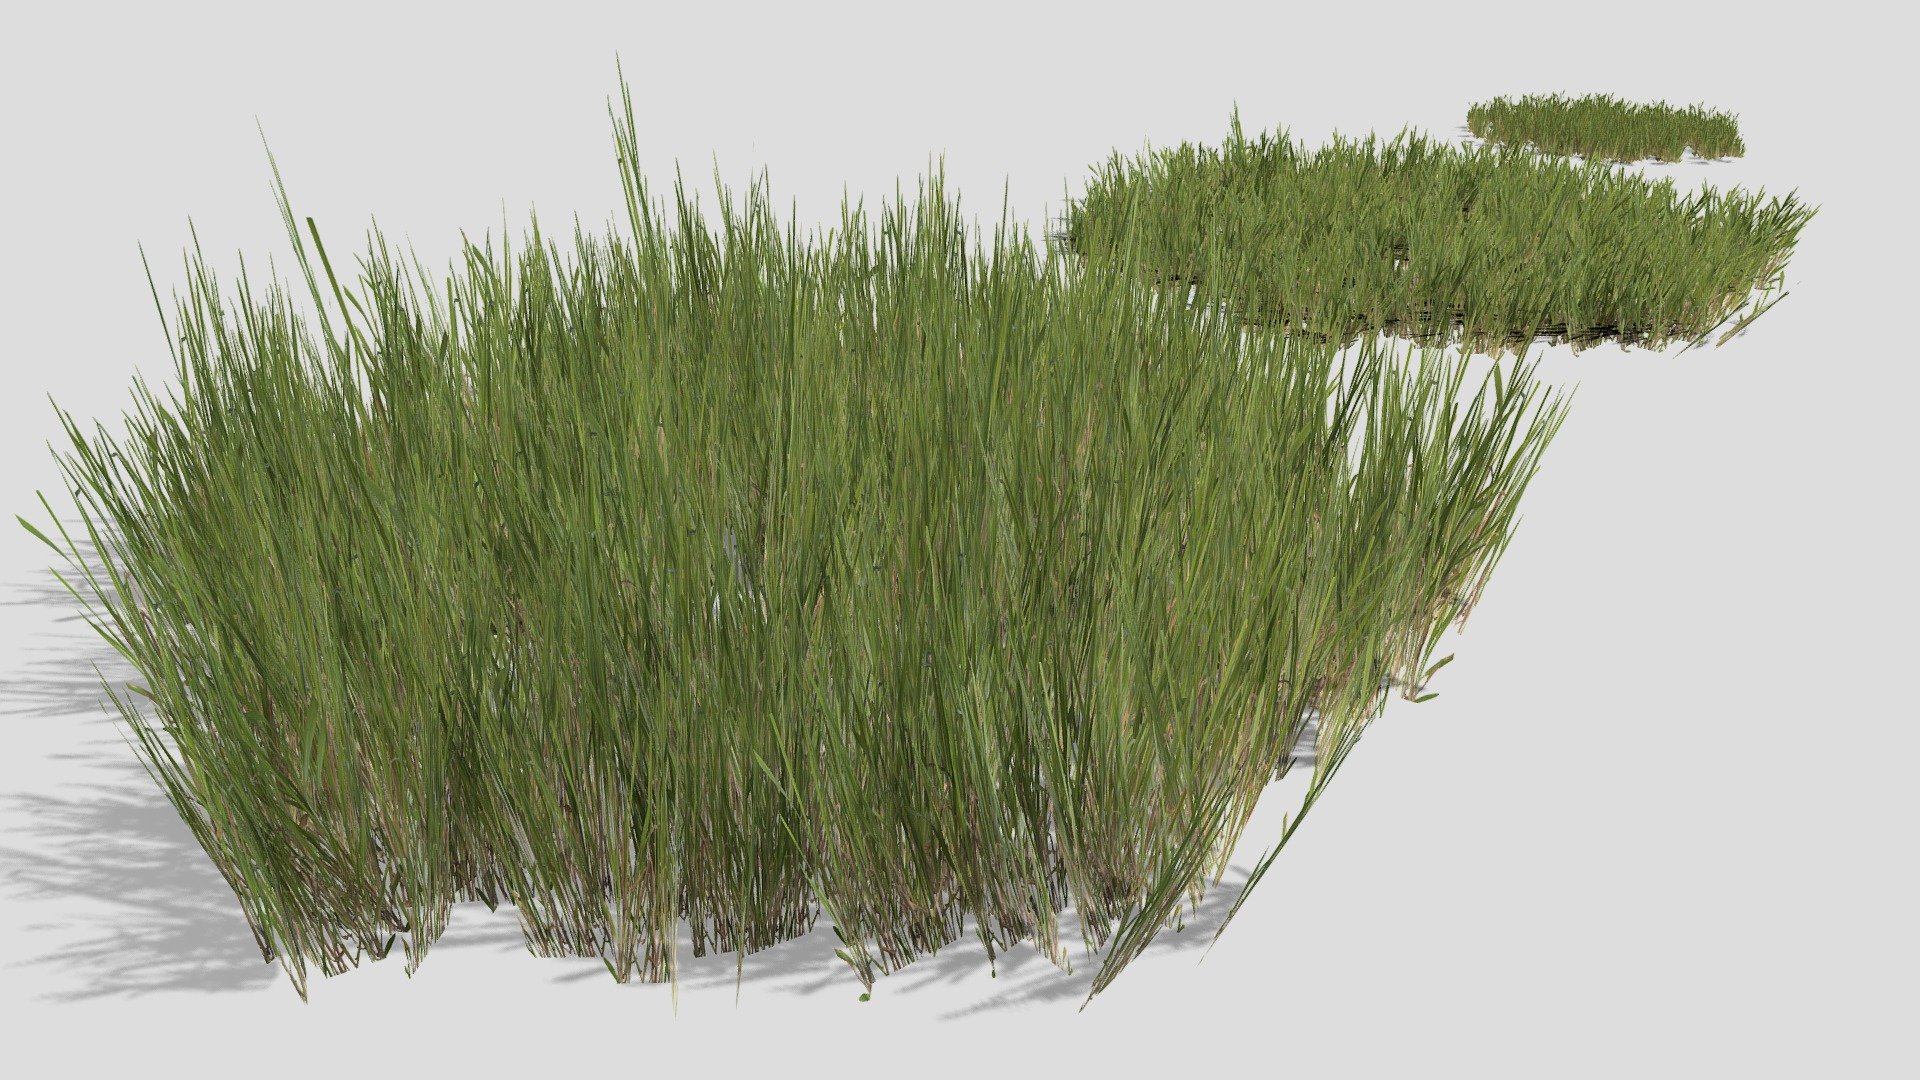 Low poly models of some grass patches.  Good for filling large areas with grass

More examples of rendered foliage can be seen here:  https://www.artstation.com/leonlabyk - Grass Patches - Buy Royalty Free 3D model by studio lab (@leonlabyk) 3d model